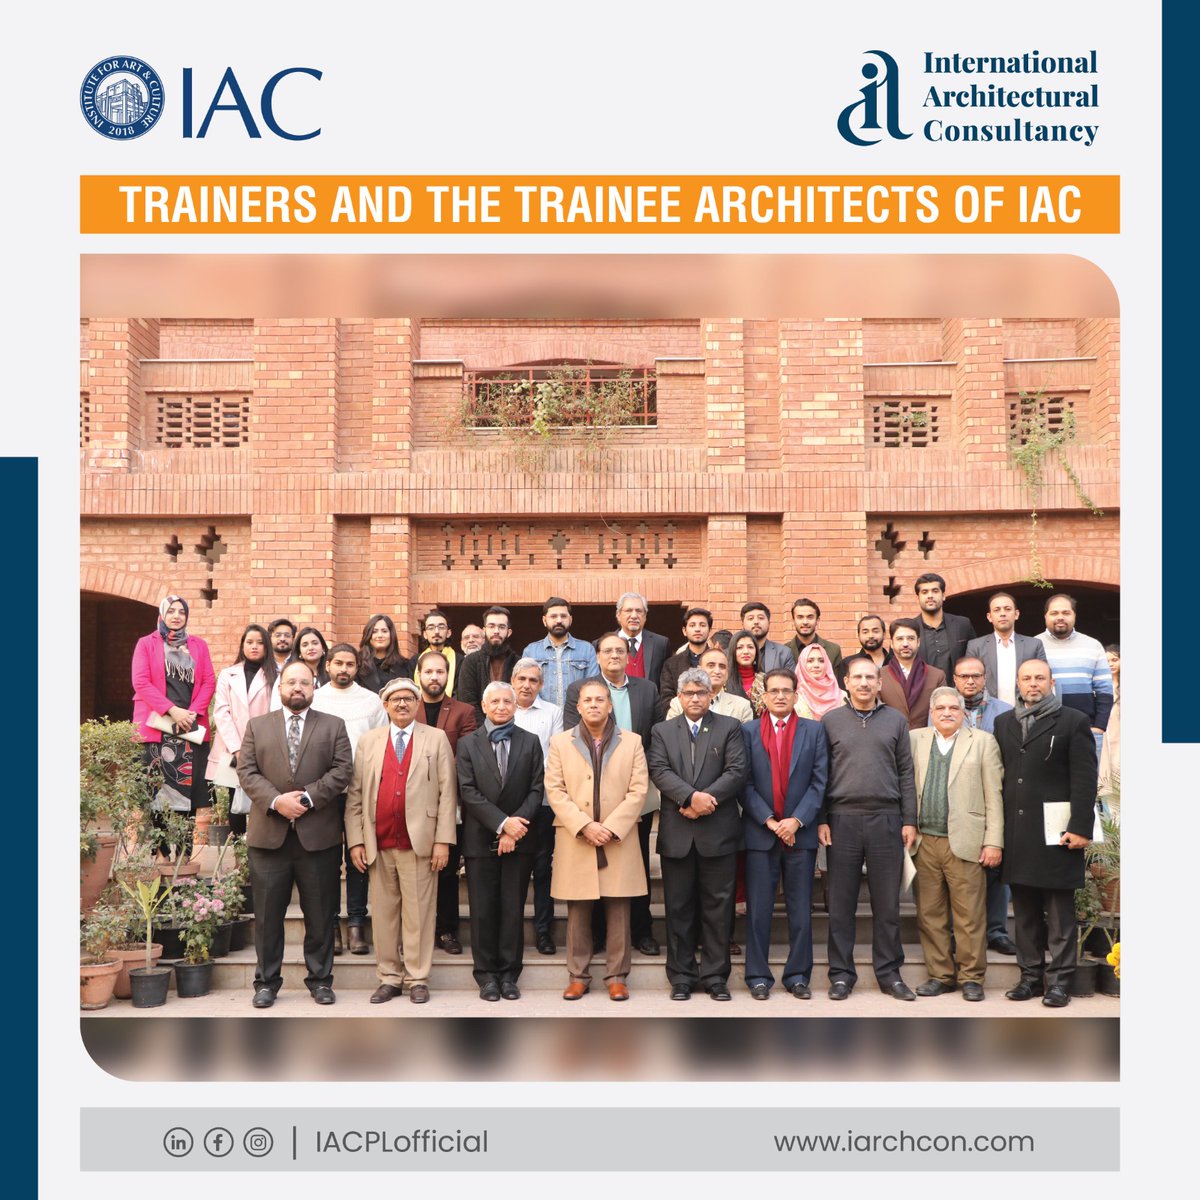 Mr. Muhammad Faisal Janjua Chancellor 𝗜𝗔𝗖 (𝘄𝘄𝘄.𝗶𝗮𝗰.𝗲𝗱𝘂.𝗽𝗸) with Trainers & Trainee Architects of the 1st Batch of flagship TRAINEE ARCHITECTS PROGRAM (TAP) an initiative of JOB PLACEMENT CENTER IAC in collaboration with 𝗜𝗔𝗖𝗣𝗟 (𝘄𝘄𝘄.𝗶𝗮𝗿𝗰𝗵𝗰𝗼𝗻.𝗰𝗼𝗺).